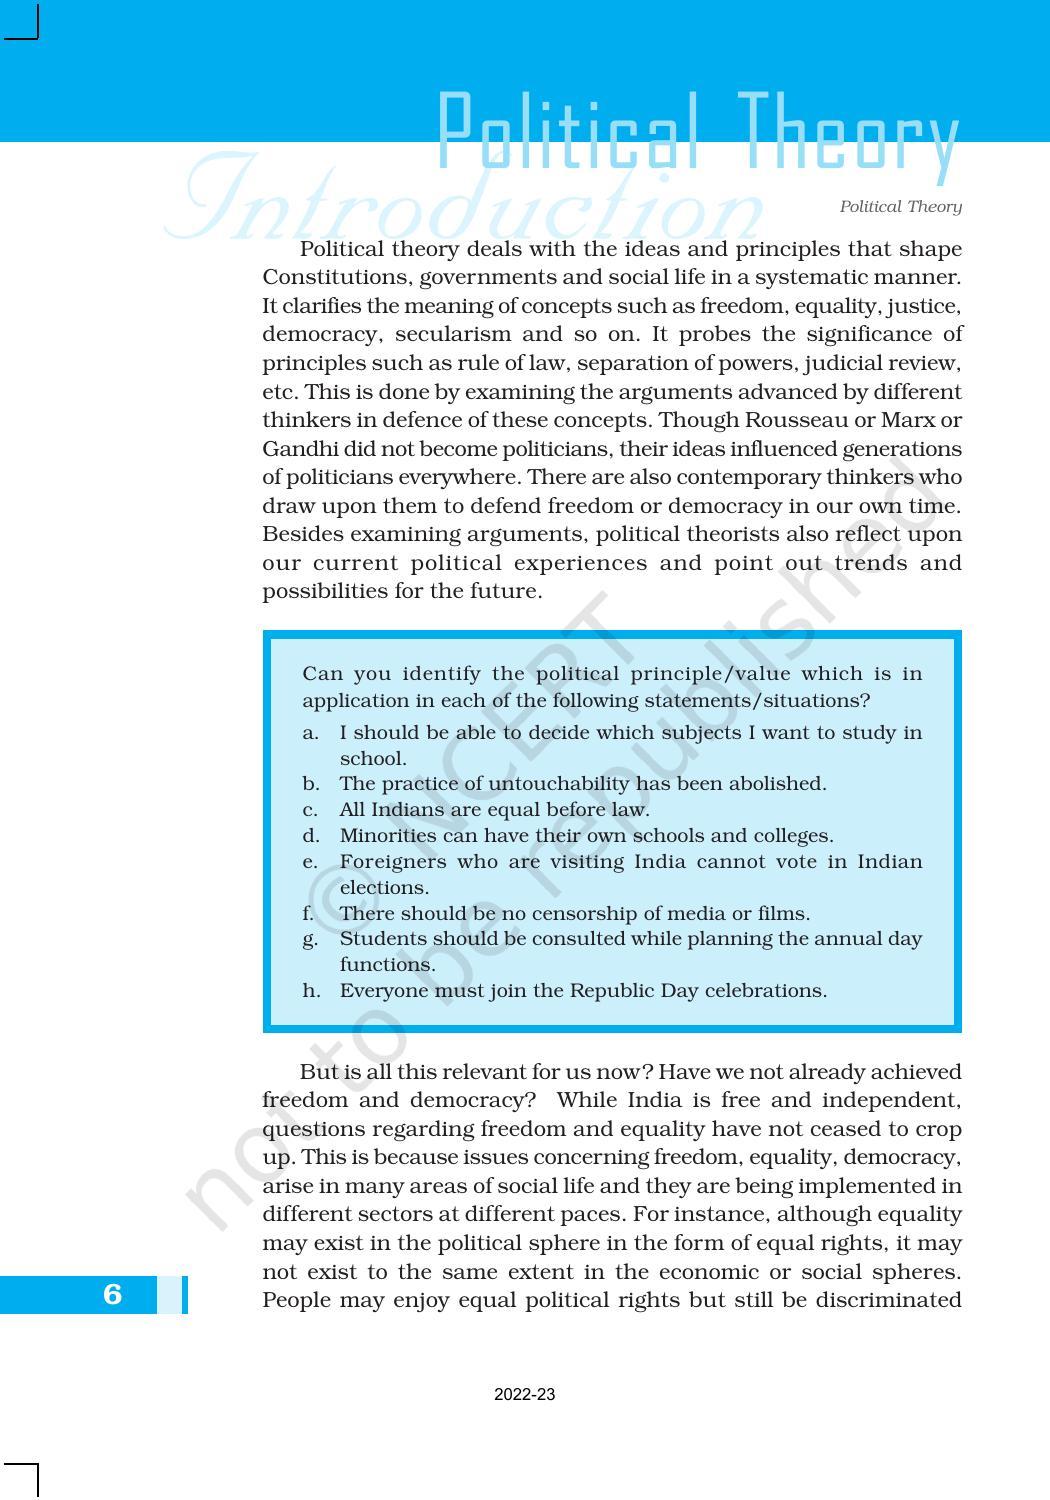 NCERT Book for Class 11 Political Science (Political Theory) Chapter 1 Political Theory: An Introduction - Page 6